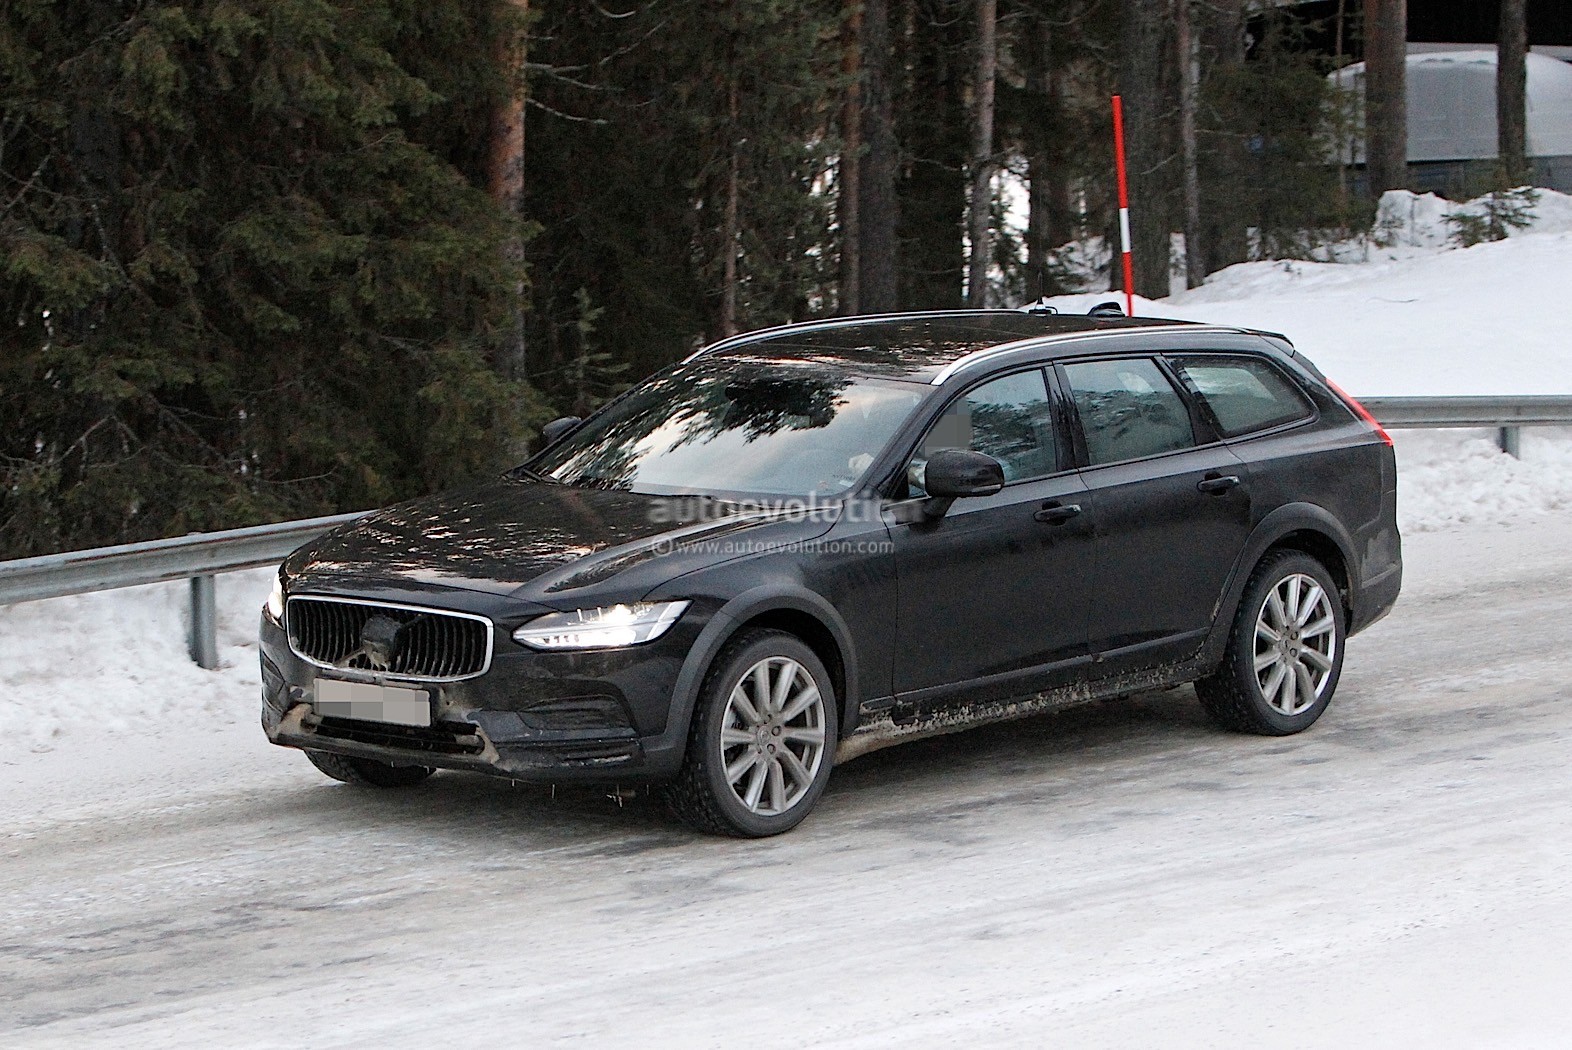 https://s1.cdn.autoevolution.com/images/news/gallery/2021-volvo-s90-and-v90-facelift-wear-useless-camouflage-winter-testing_2.jpg